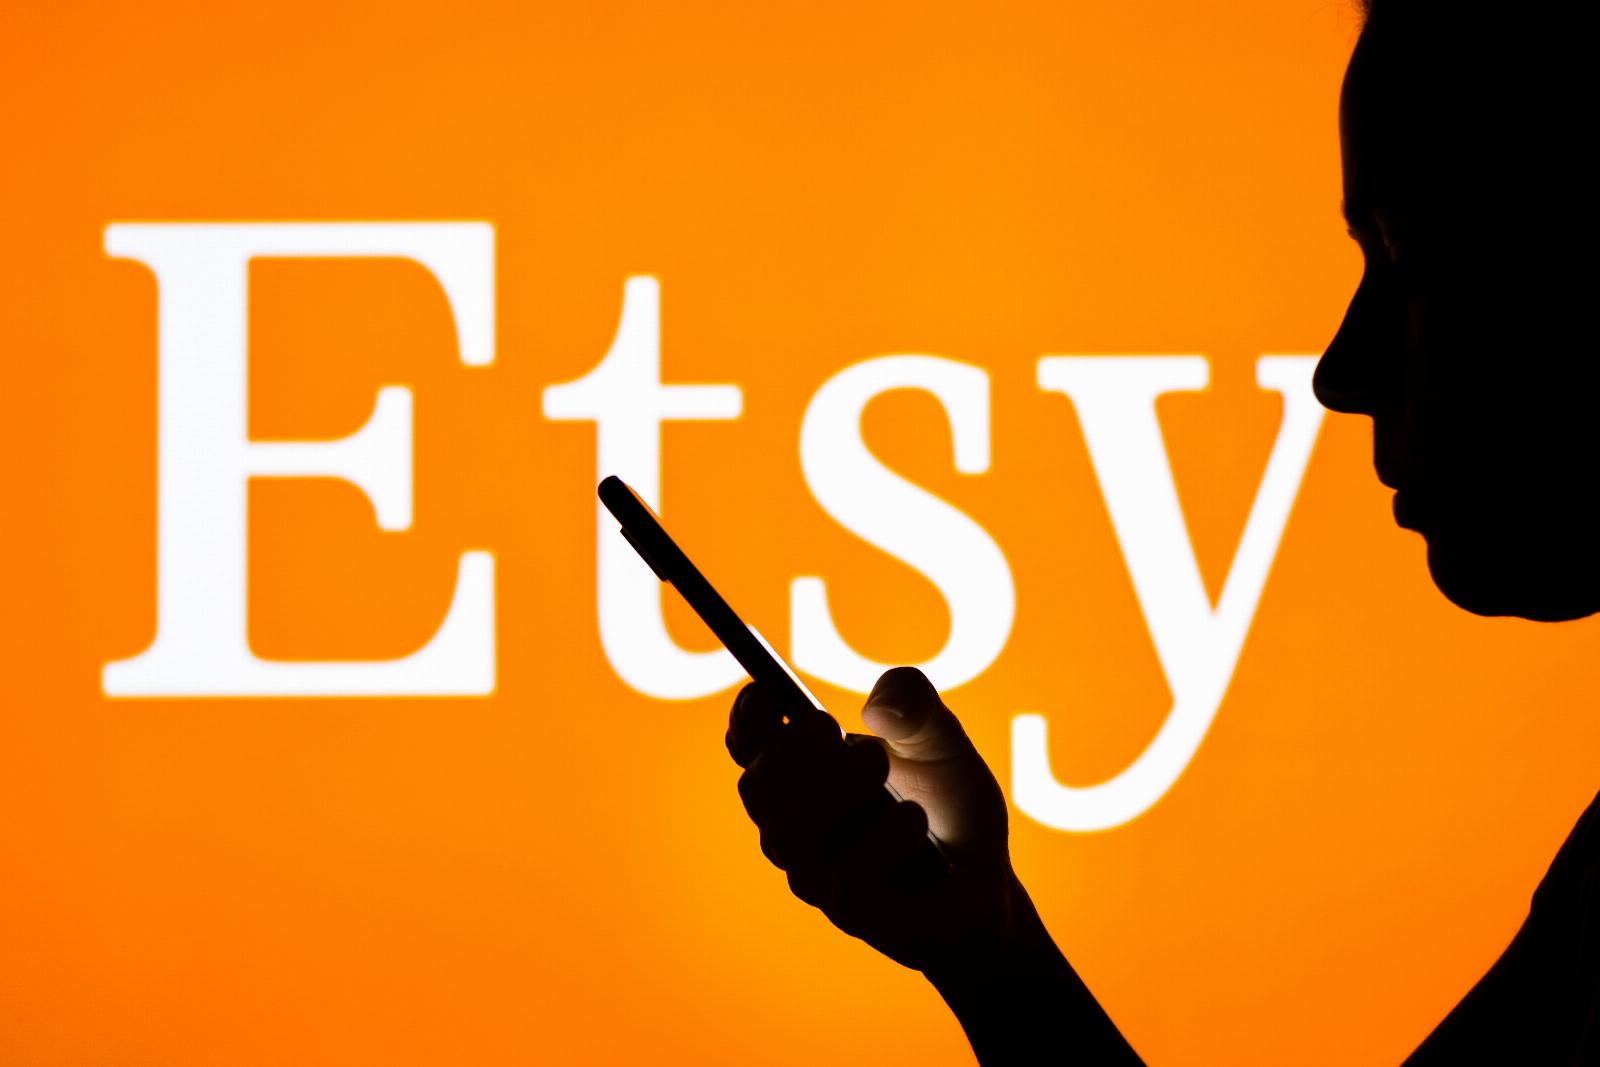 Etsy’s latest feature lets couples create wedding registries with items on its marketplace